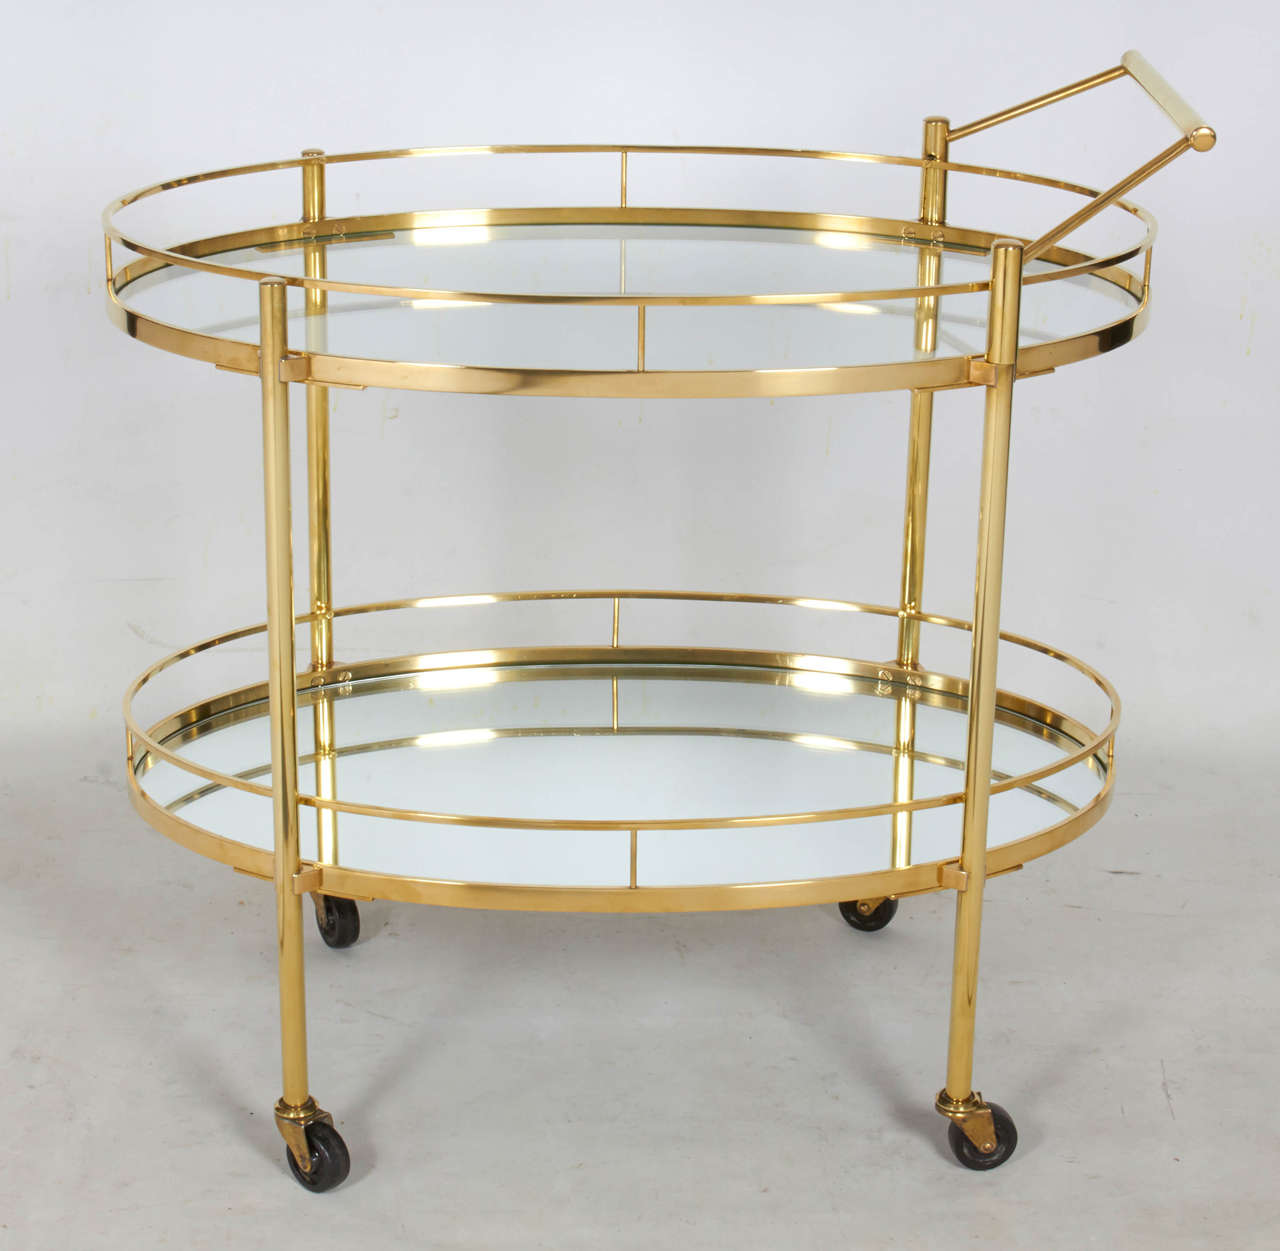 Chic serving or bar cart in gleaming polished brass. The cart has a graceful oval form and is very nicely detailed with a glass top shelf and a mirrored lower shelf. The handle is adjustable and easily pulls off if desired. Please contact for